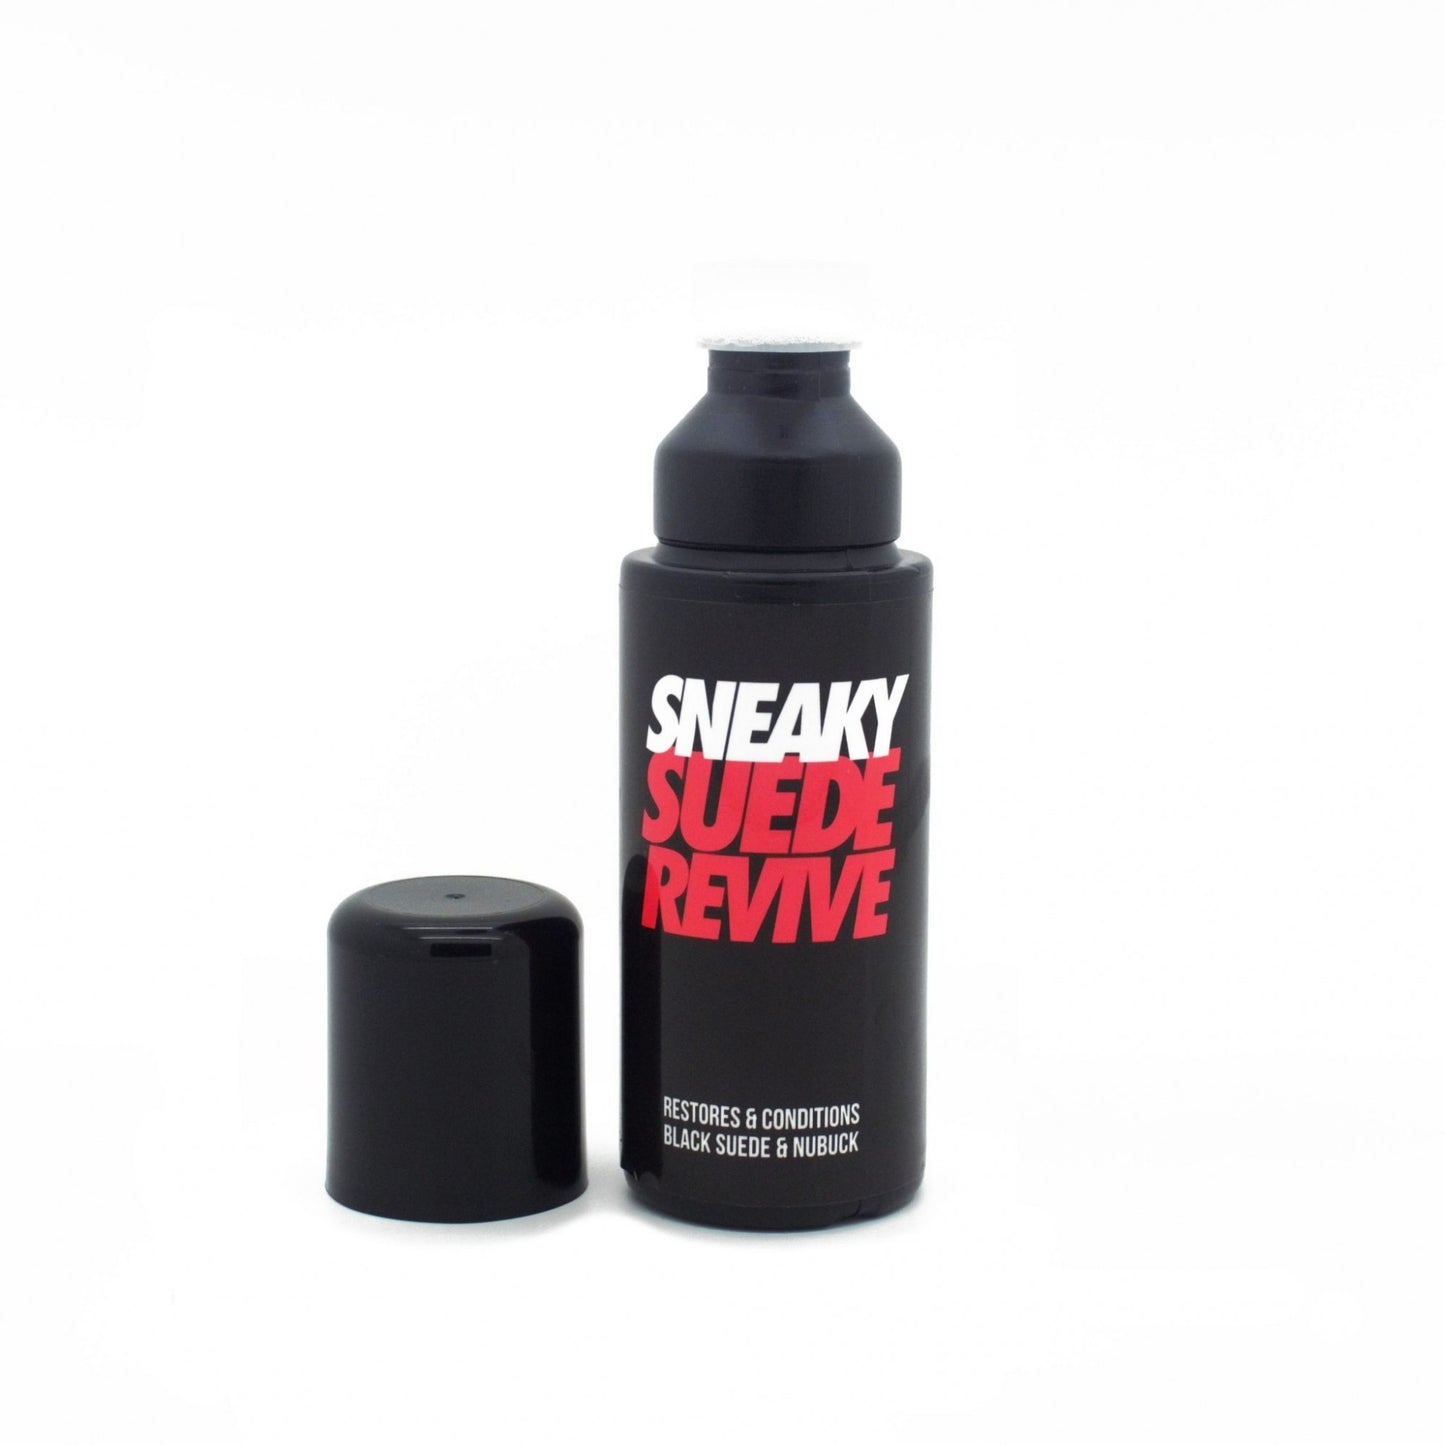 SNEAKY SUEDE REVIVE